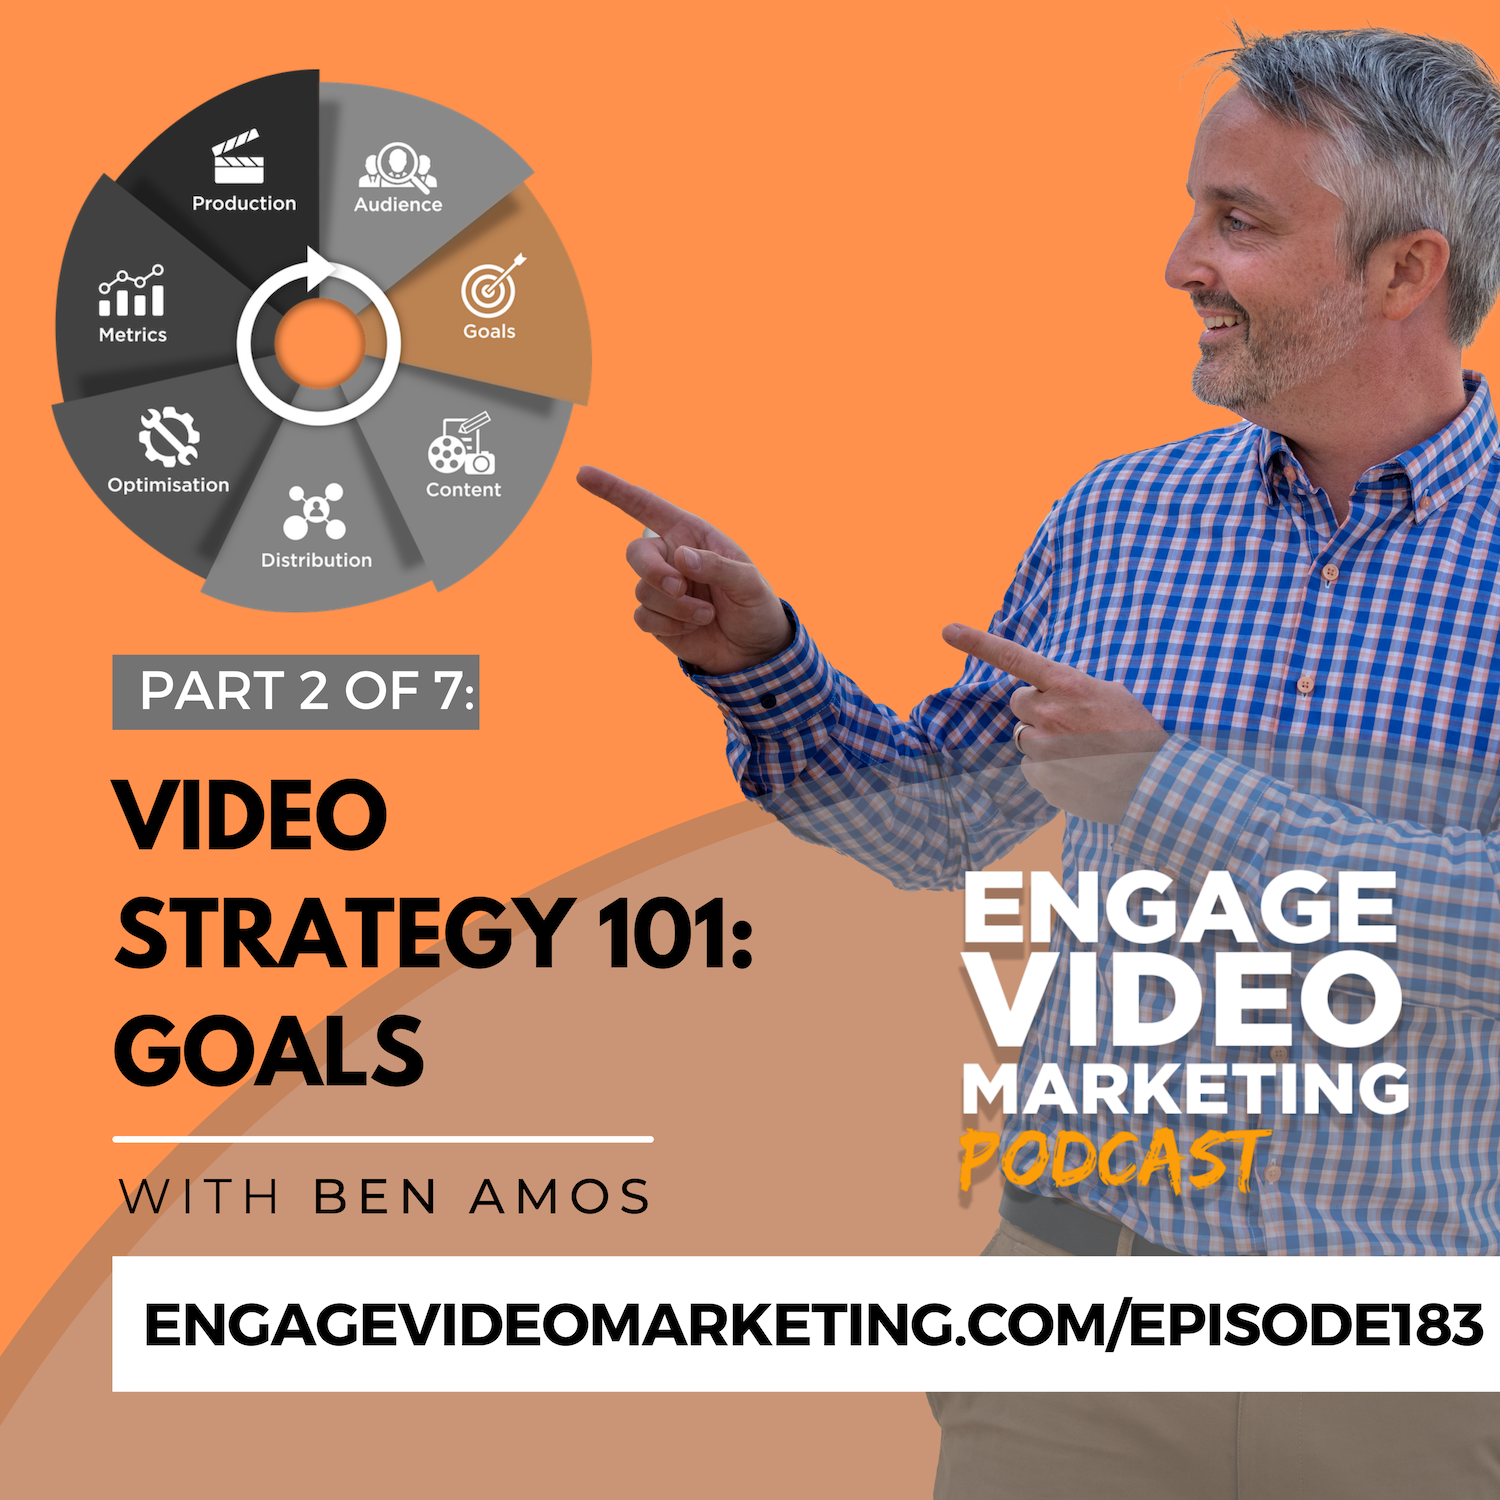 Video Strategy 101: Goals